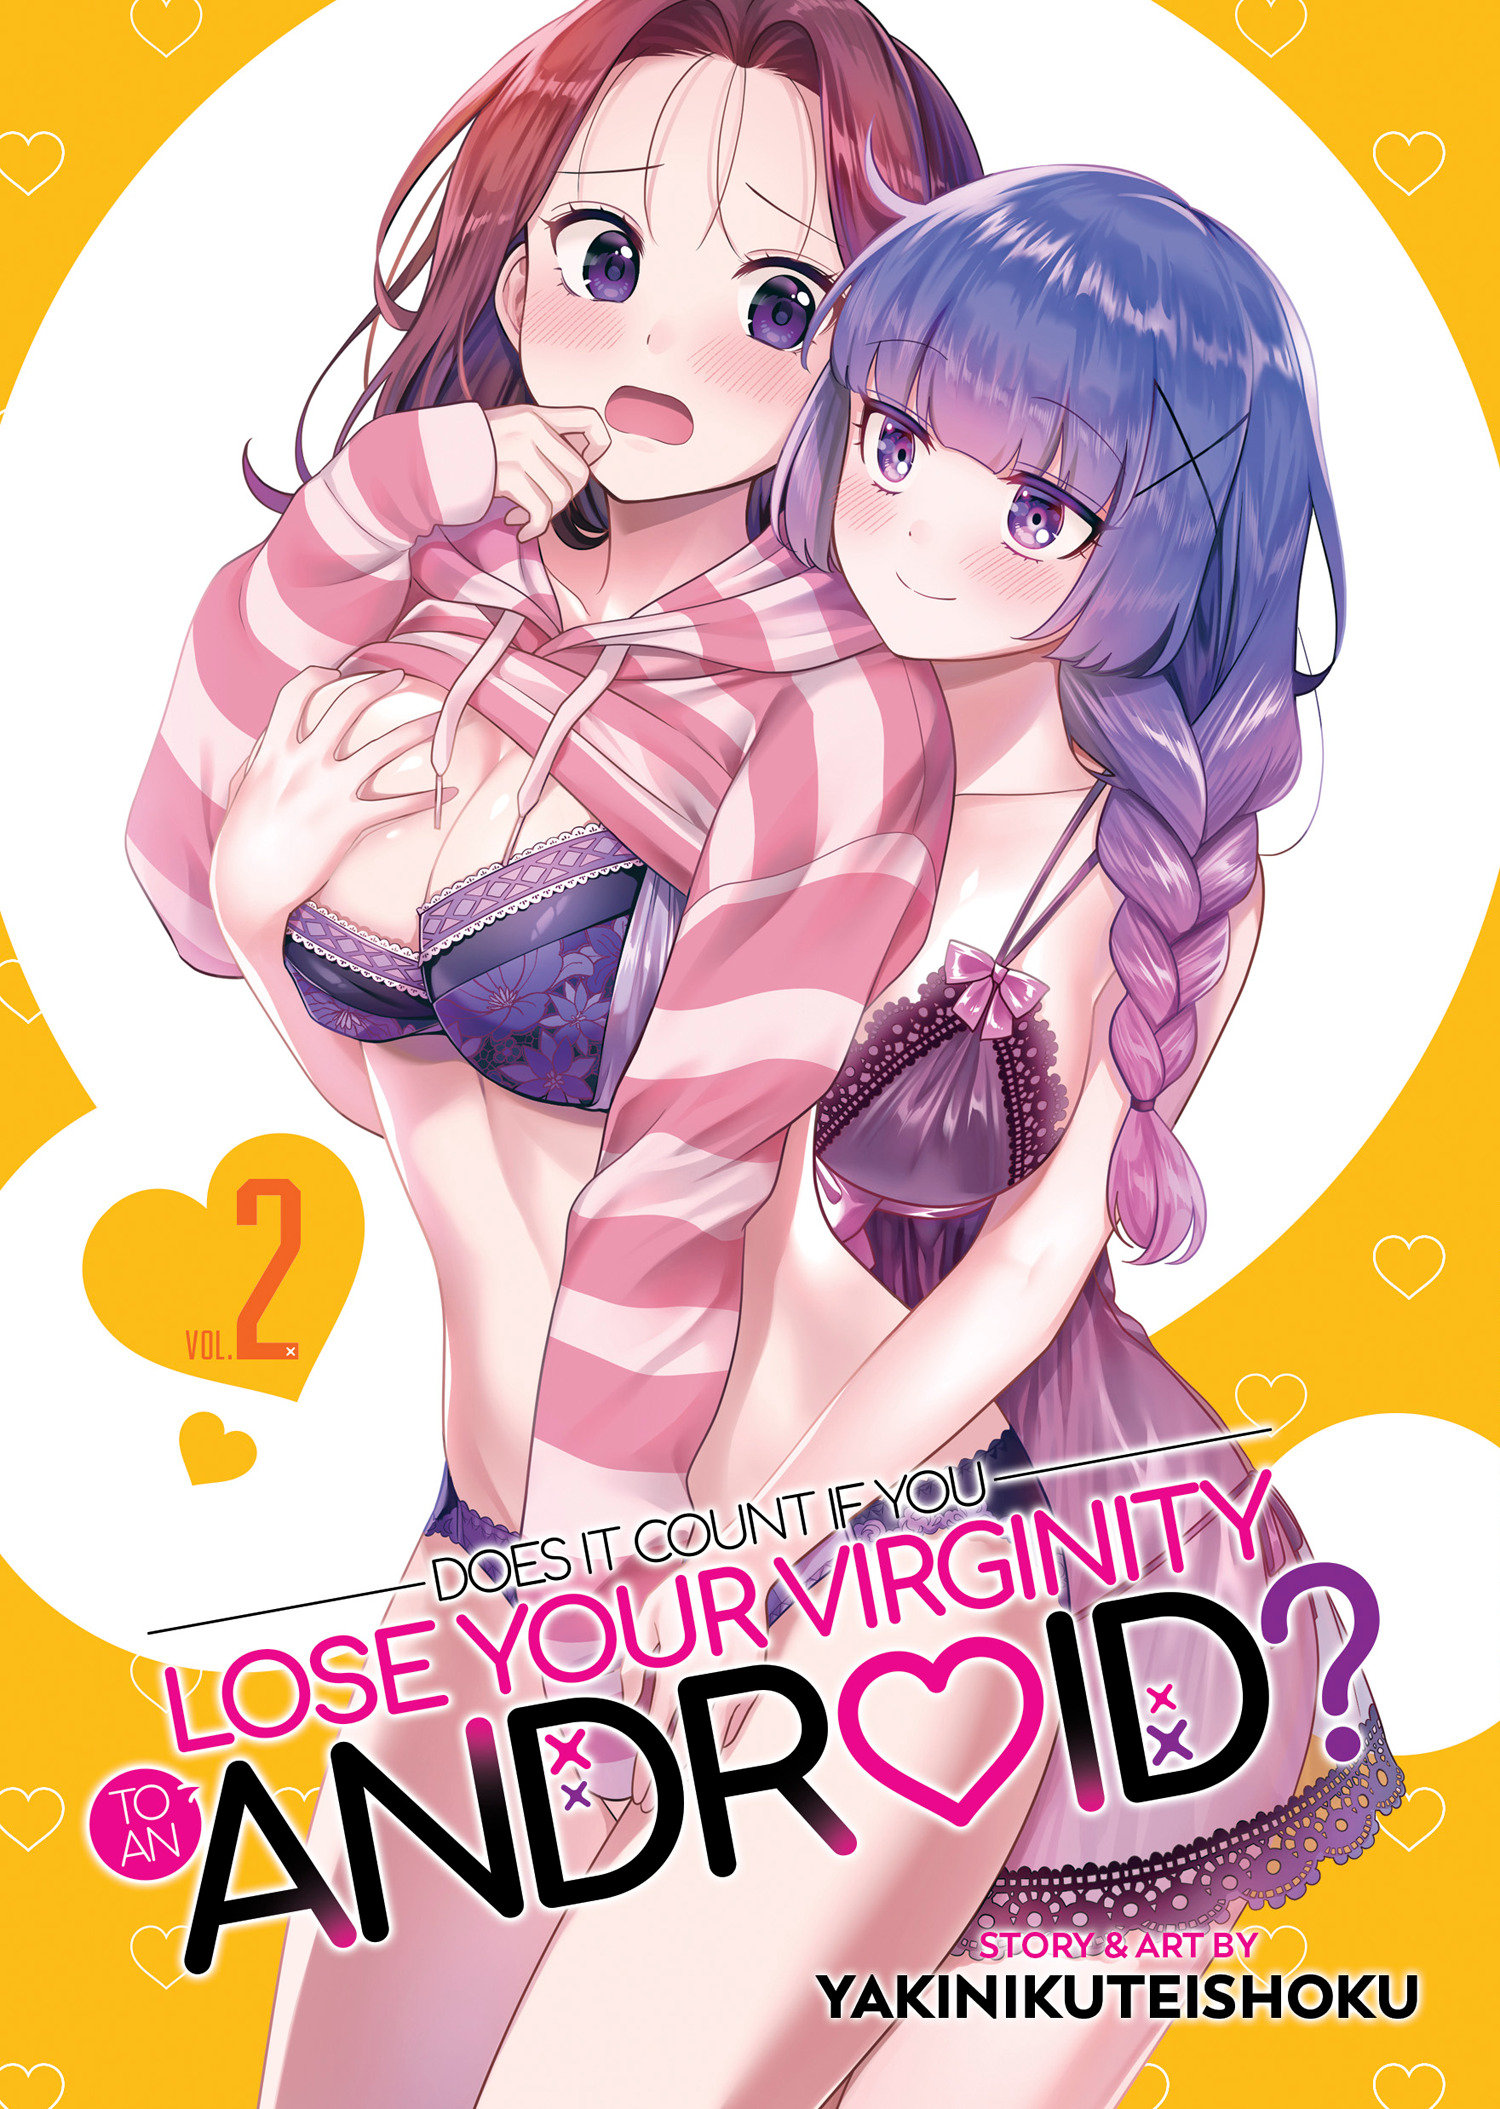 Does It Count If You Lose Your Virginity to an Android? Manga Volume 2